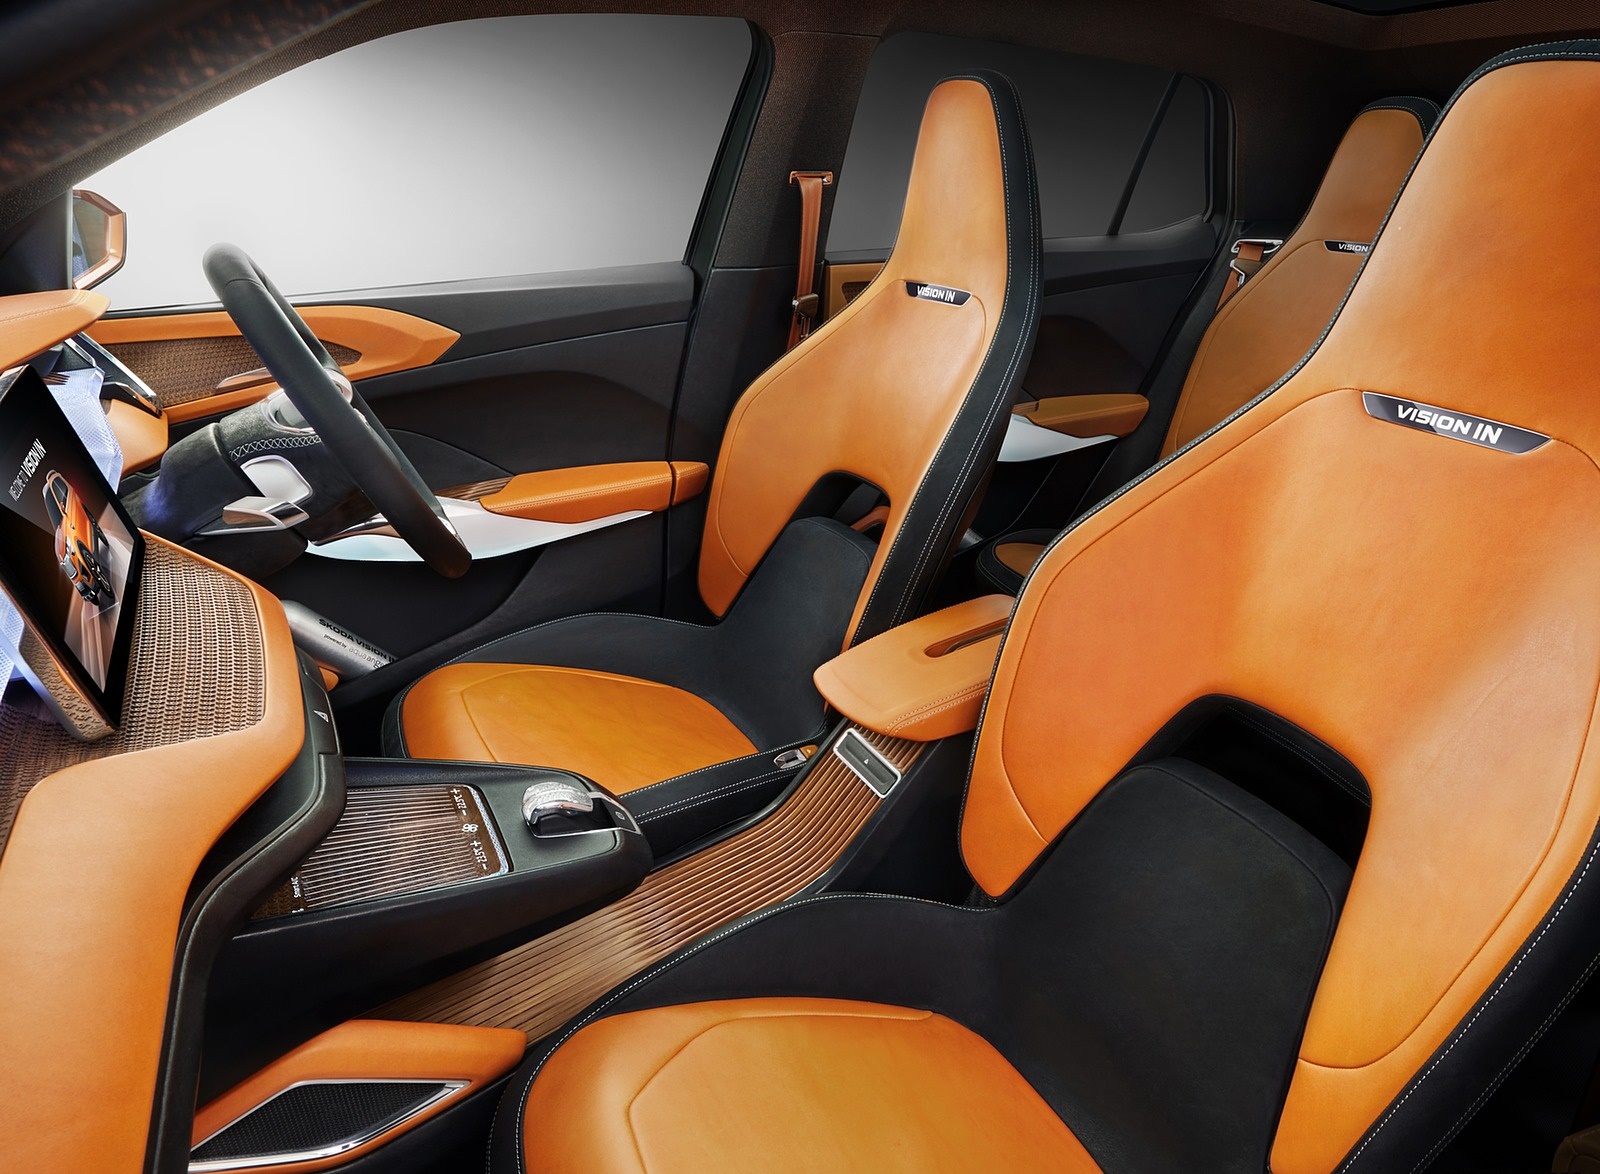 2020 Škoda Vision IN Interior Front Seats Wallpapers #11 of 21